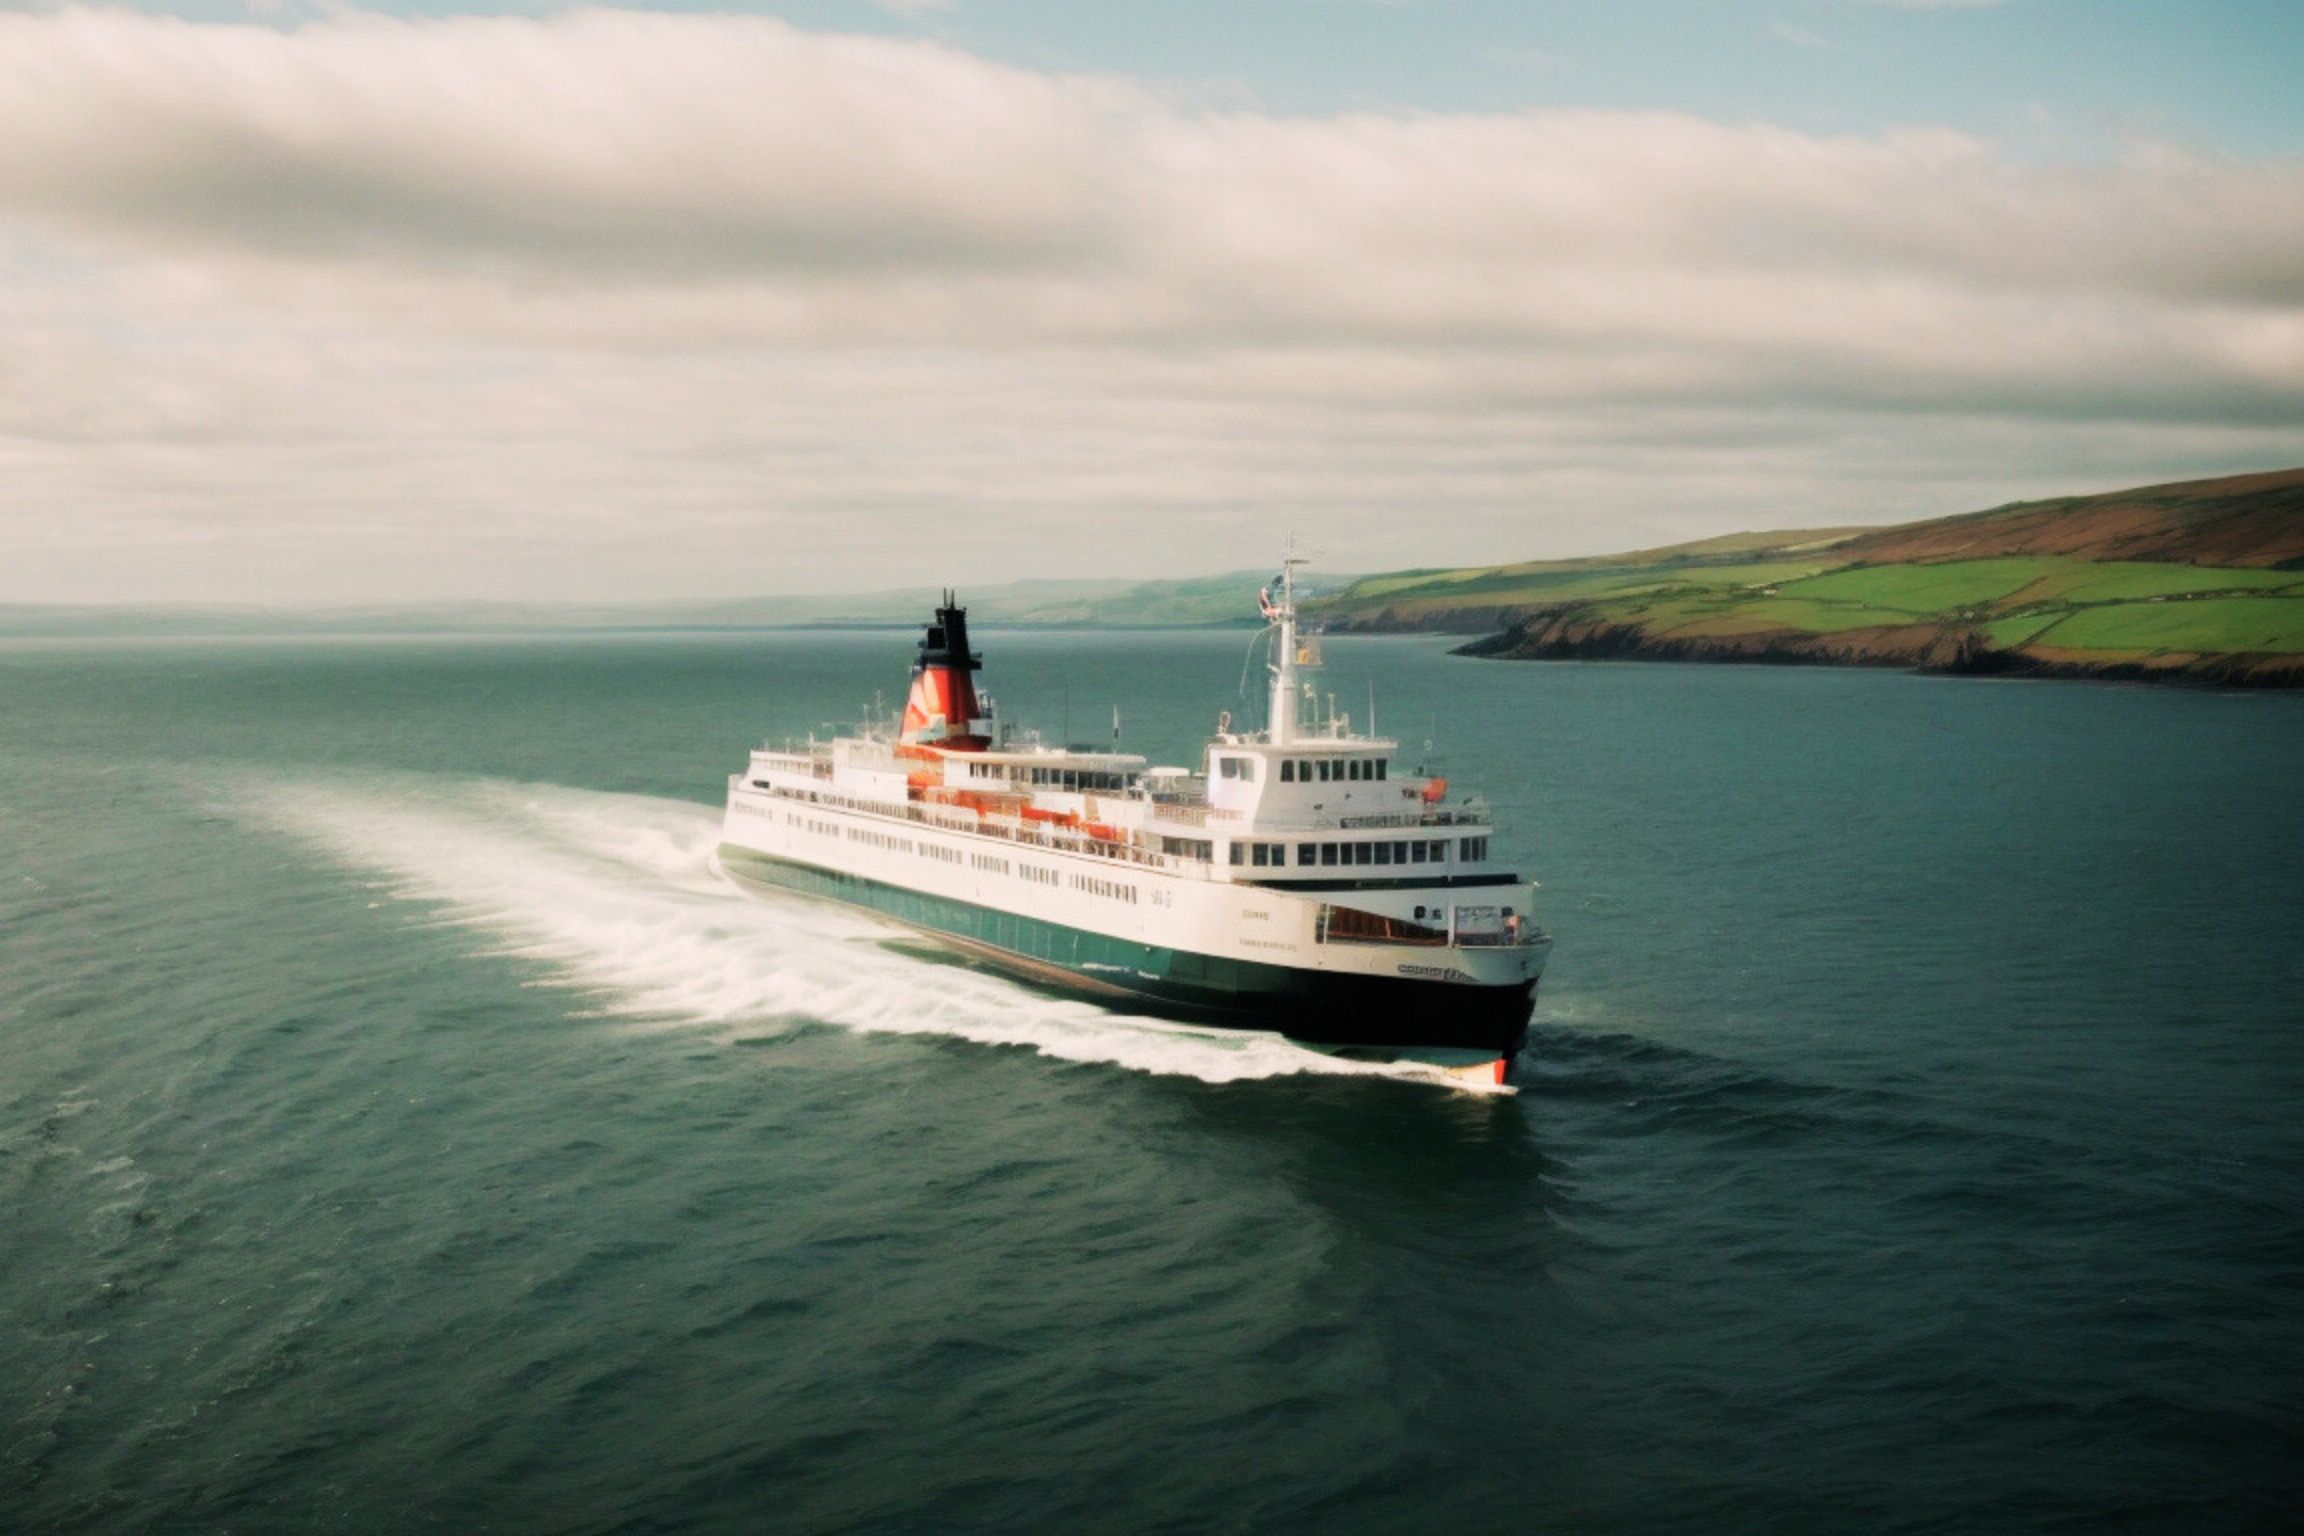 Artist's impression of a proposed ferry that could link Wales with Cornwall